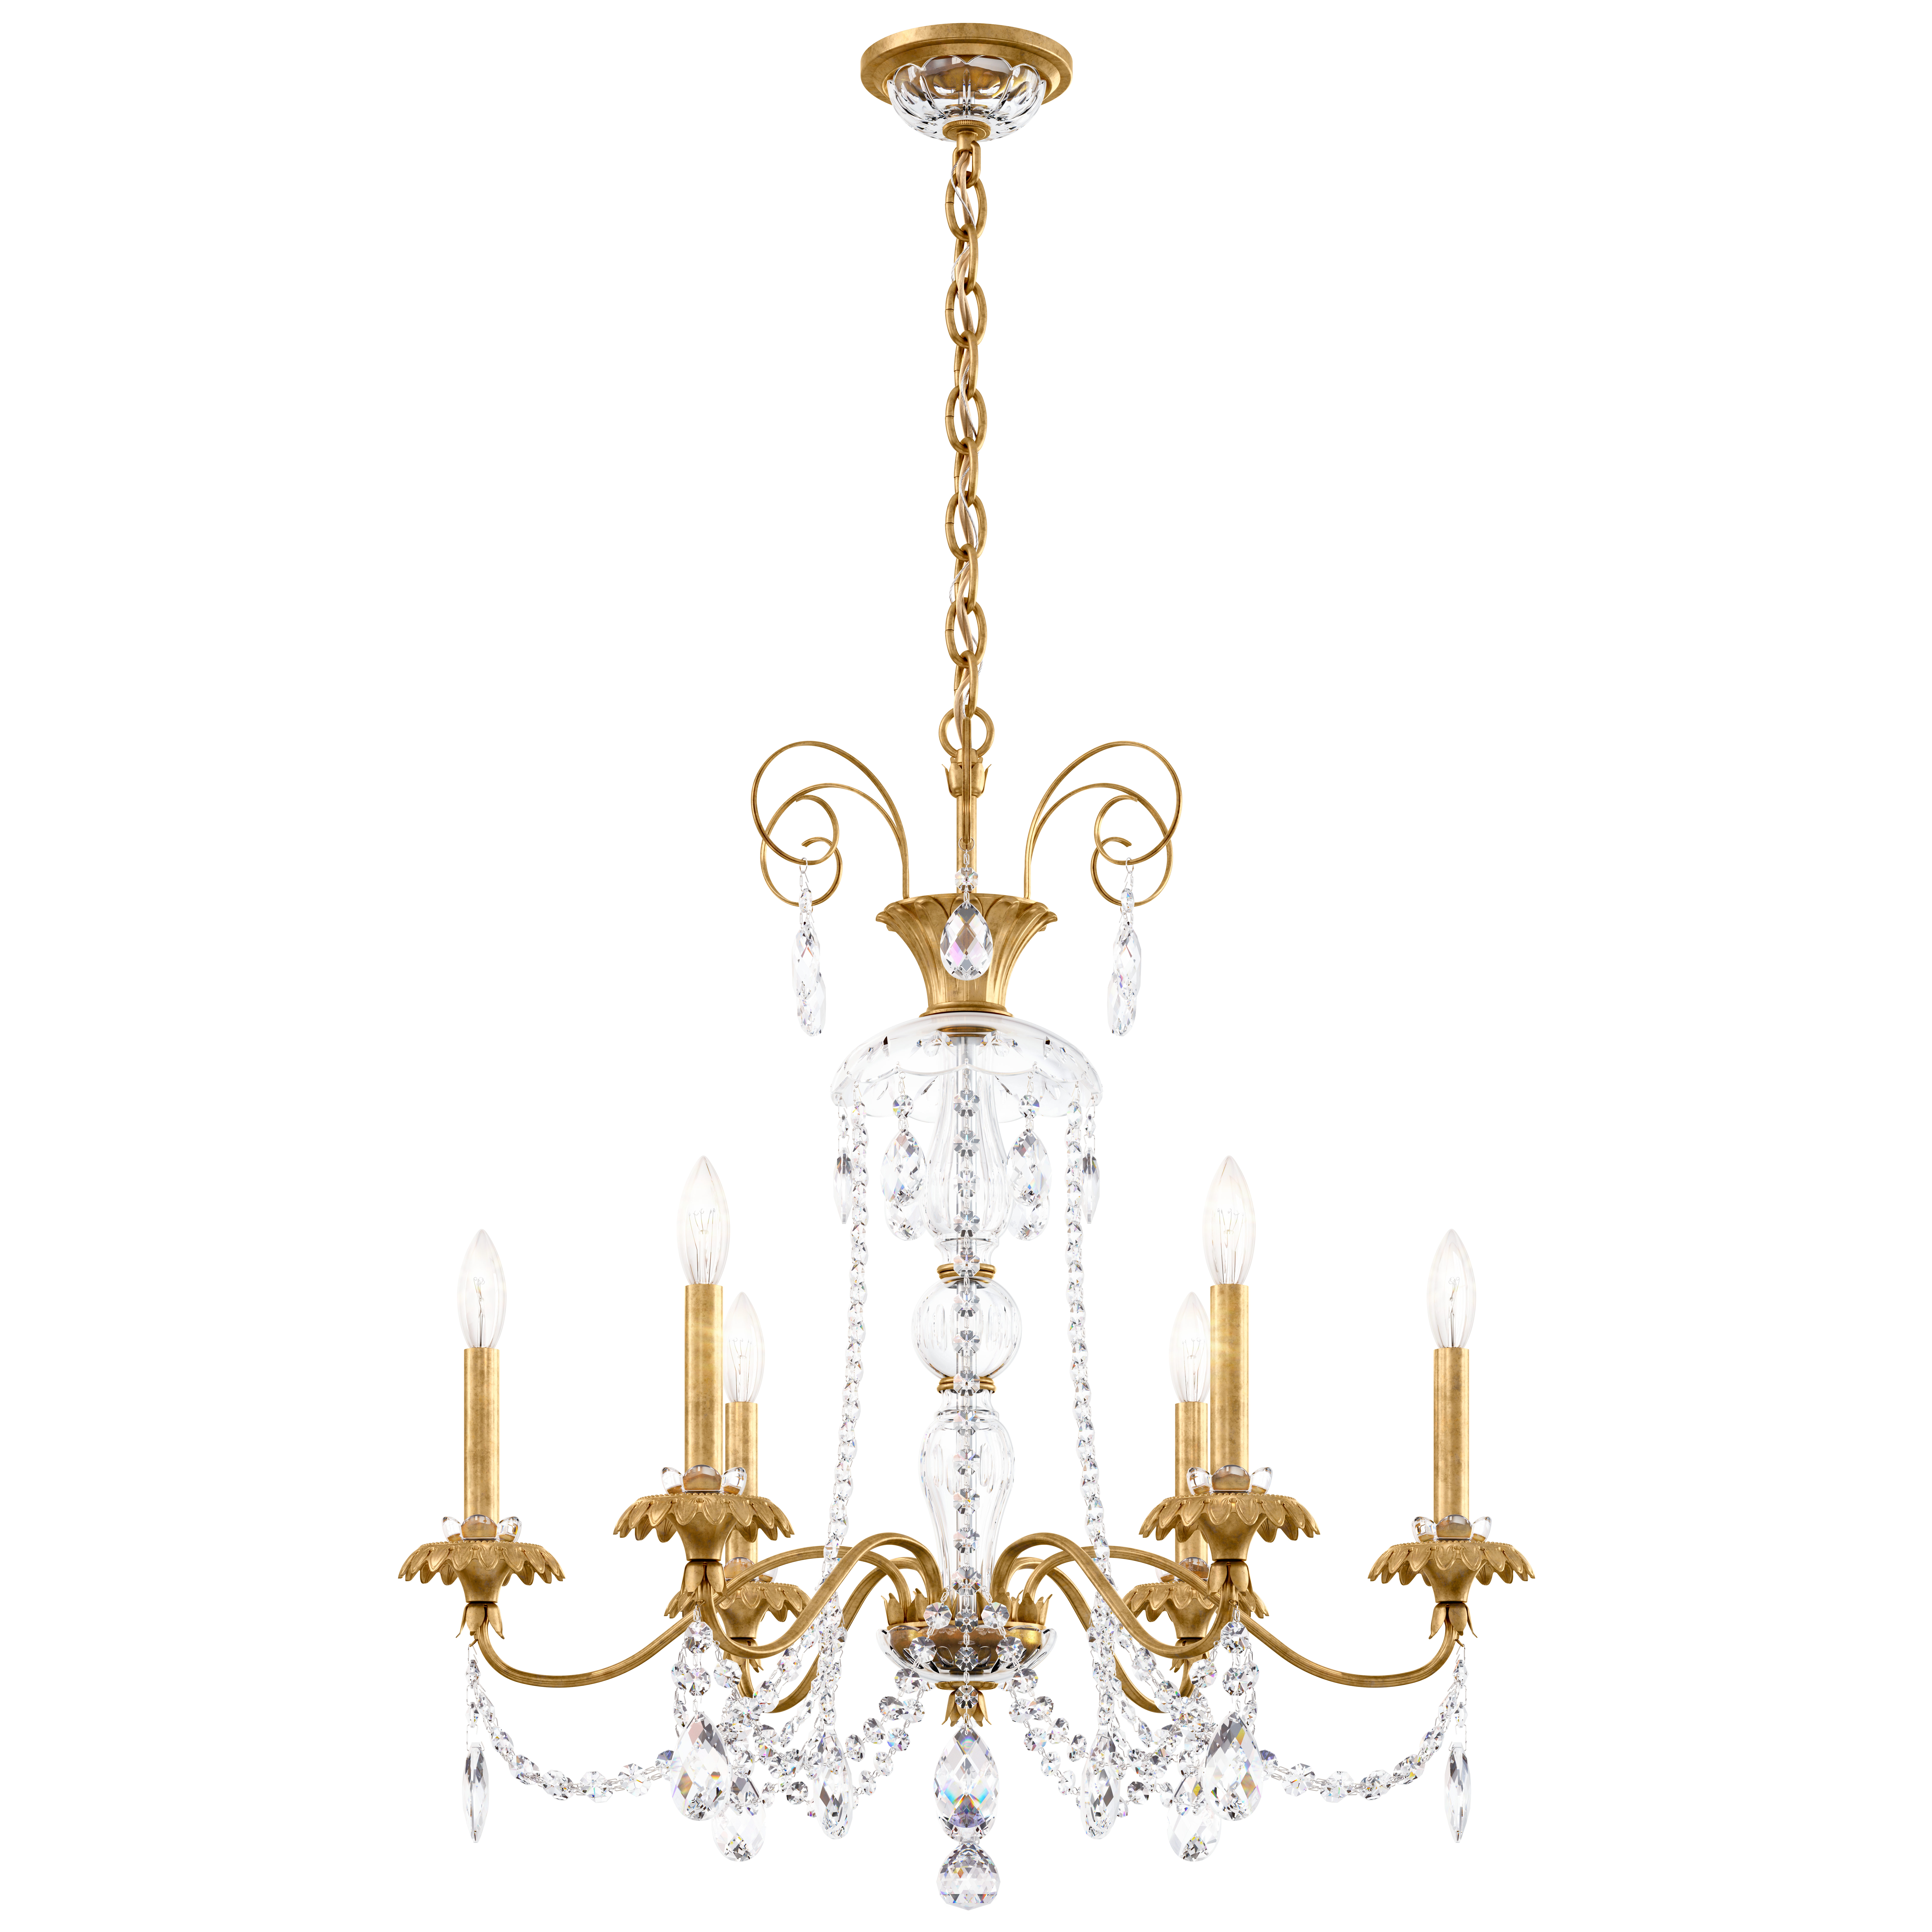 Schonbek AT1006N-22H Helenia 6 Light Traditional Chandelier in Heirloom Gold with Clear Heritage Crystal